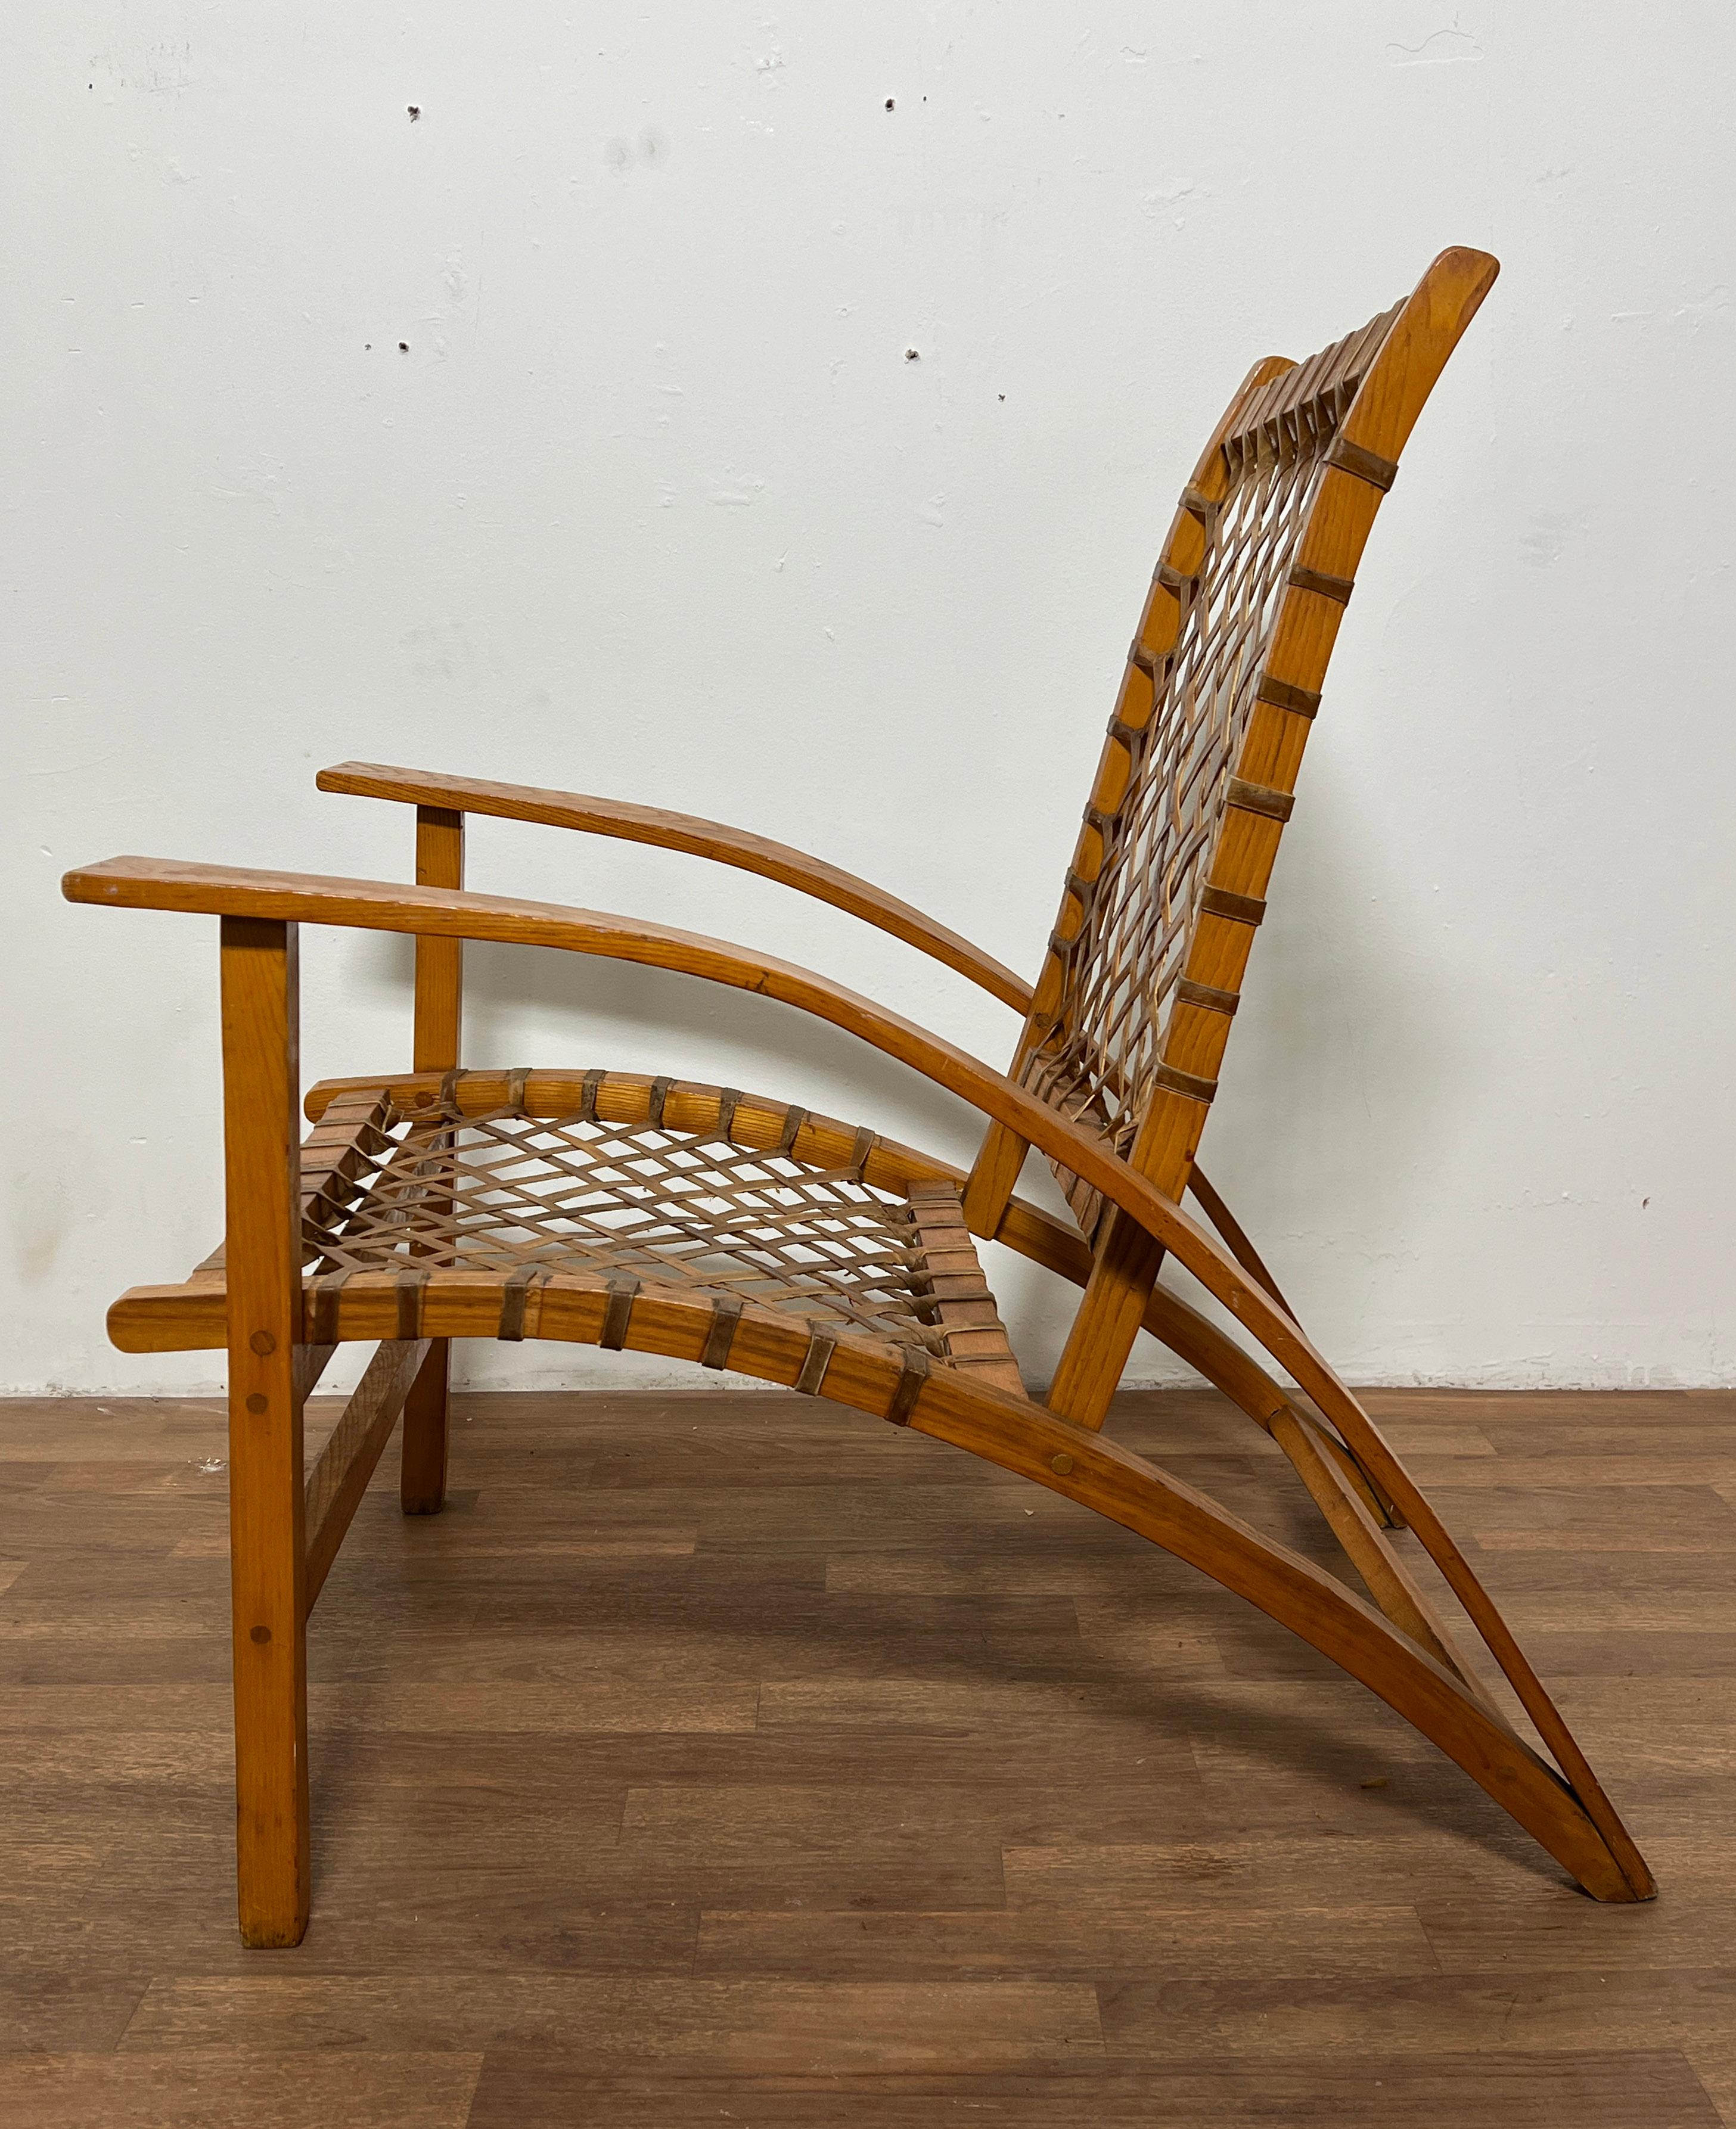 Circa 1950s rawhide woven Adirondack style chair by Vermont Tubbs Snowshoe company designed by Gropius trained architect Carl Koch for his Techbuilt homes.